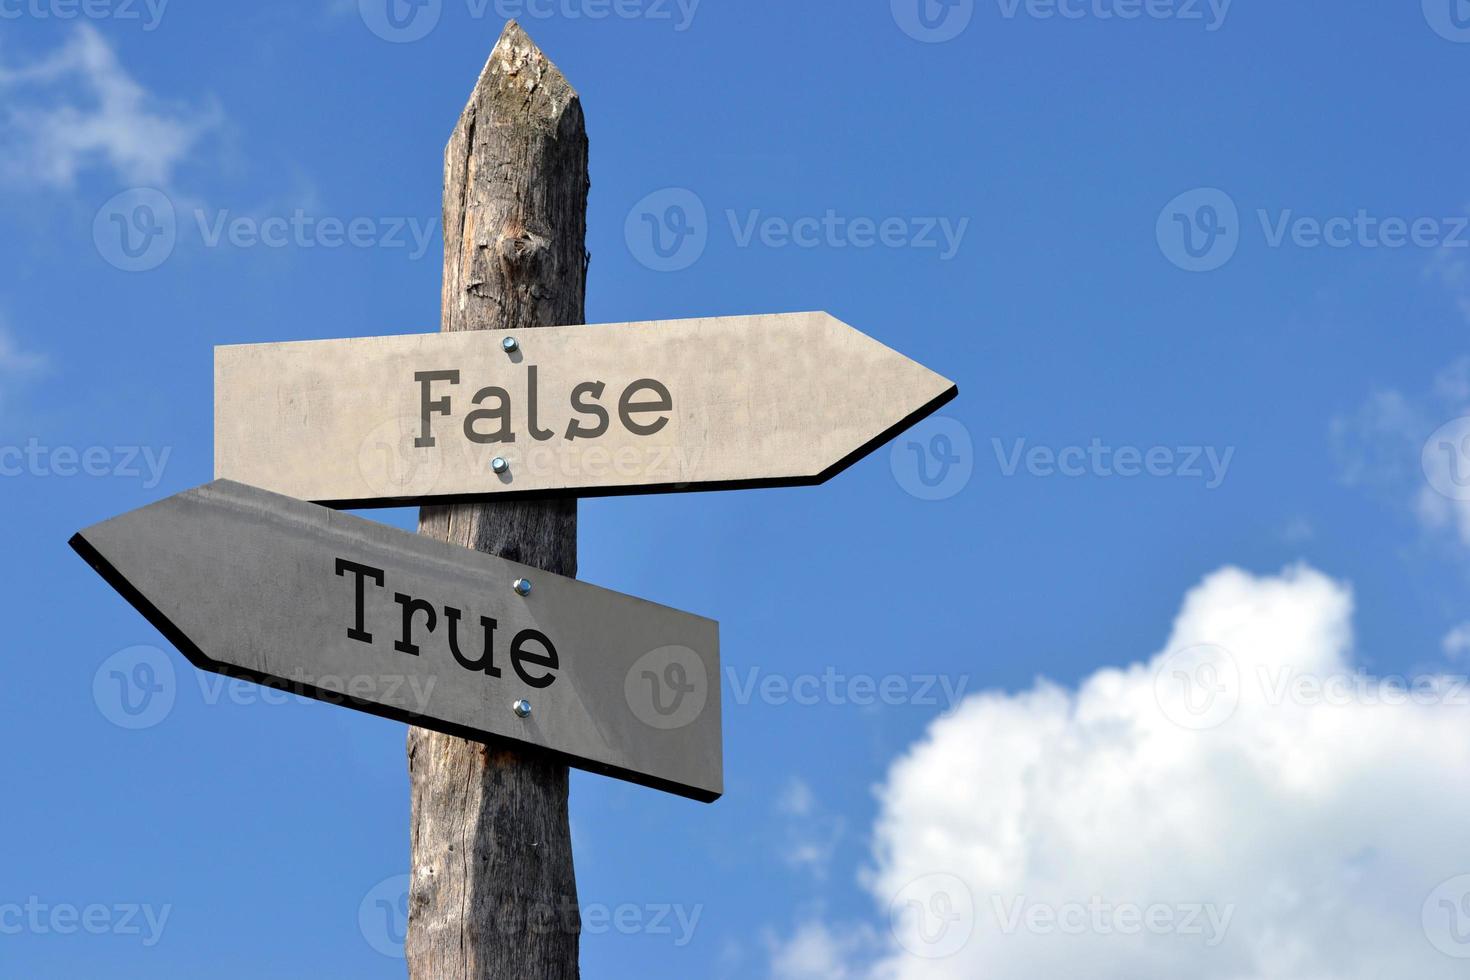 True and False - Wooden Signpost with Two Arrows, Sky with Clouds photo